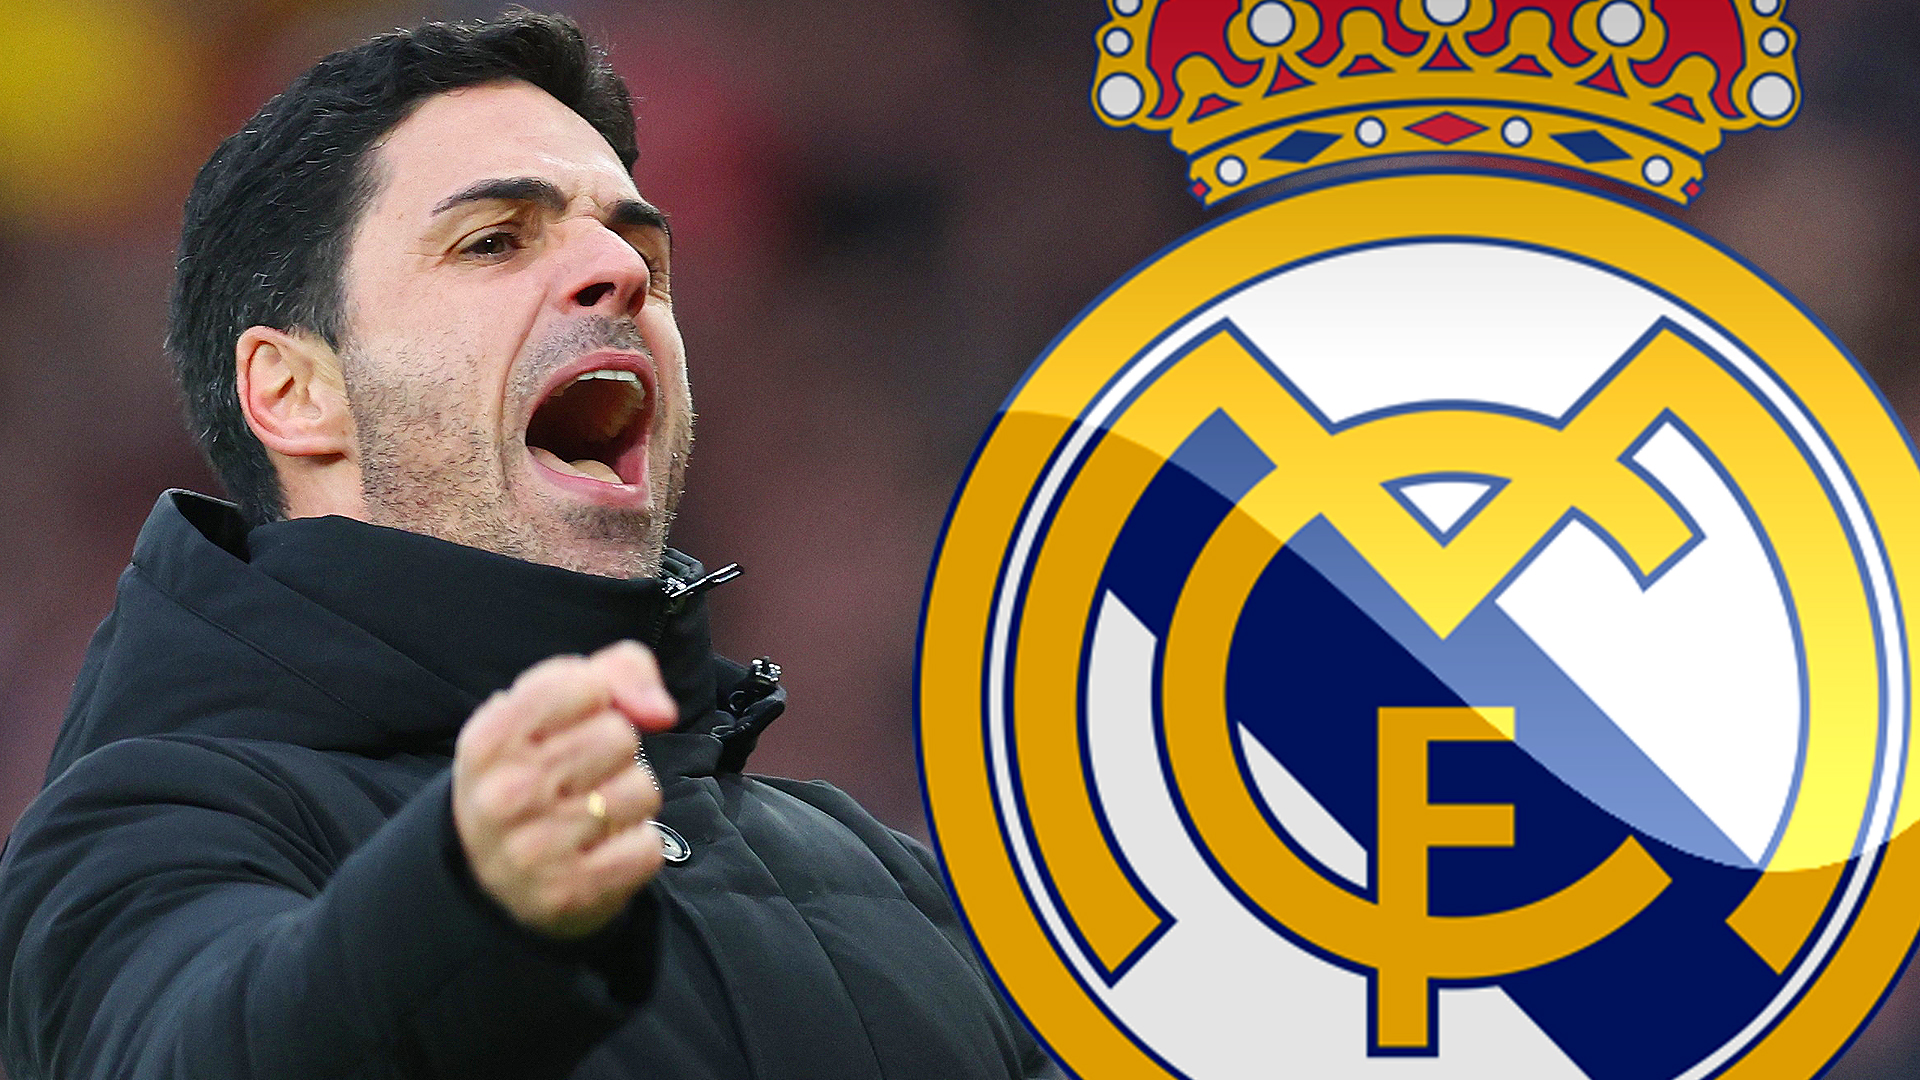 PM SPORT PREVIEW Mikel Arteta Real Madrid